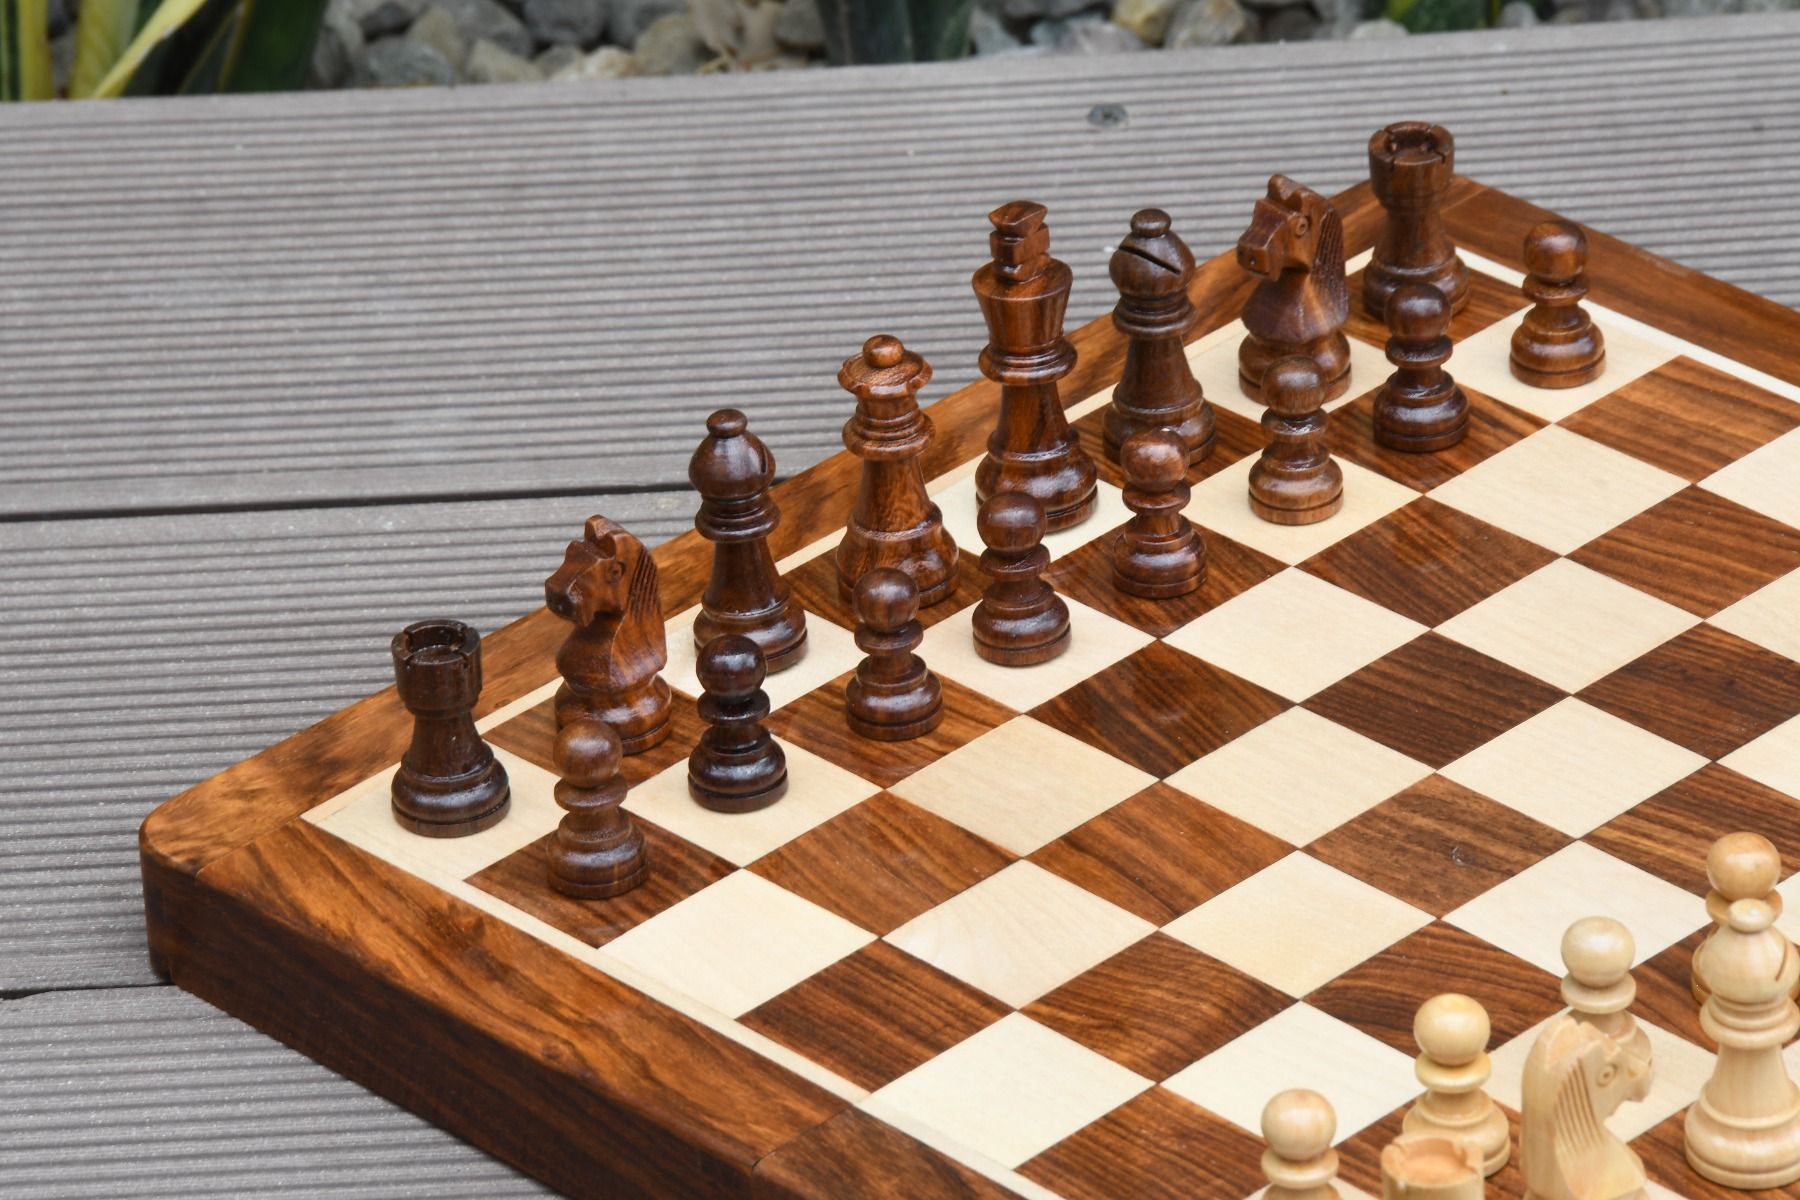 12" portable size chess pieces in Sheesham